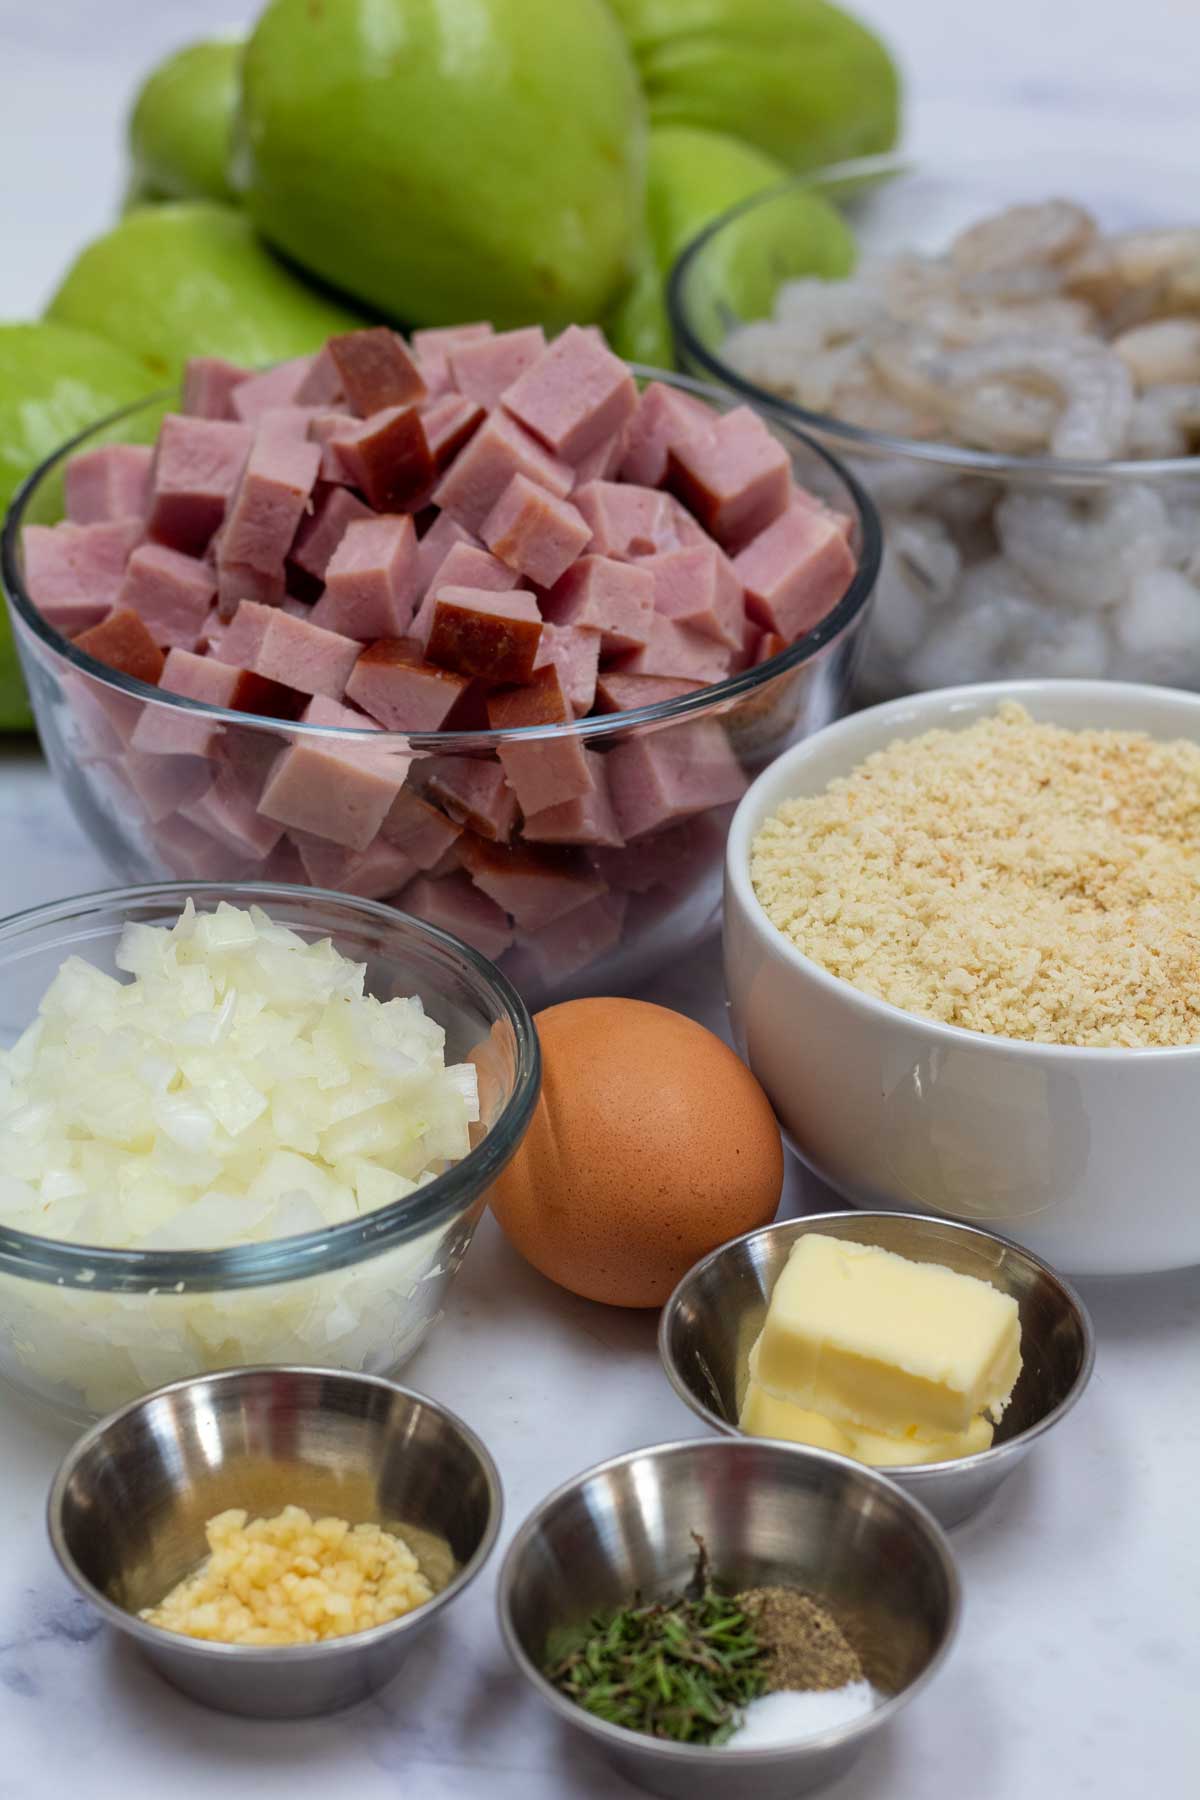 Tall image showing ingredients for this Cajun mirliton recipe.